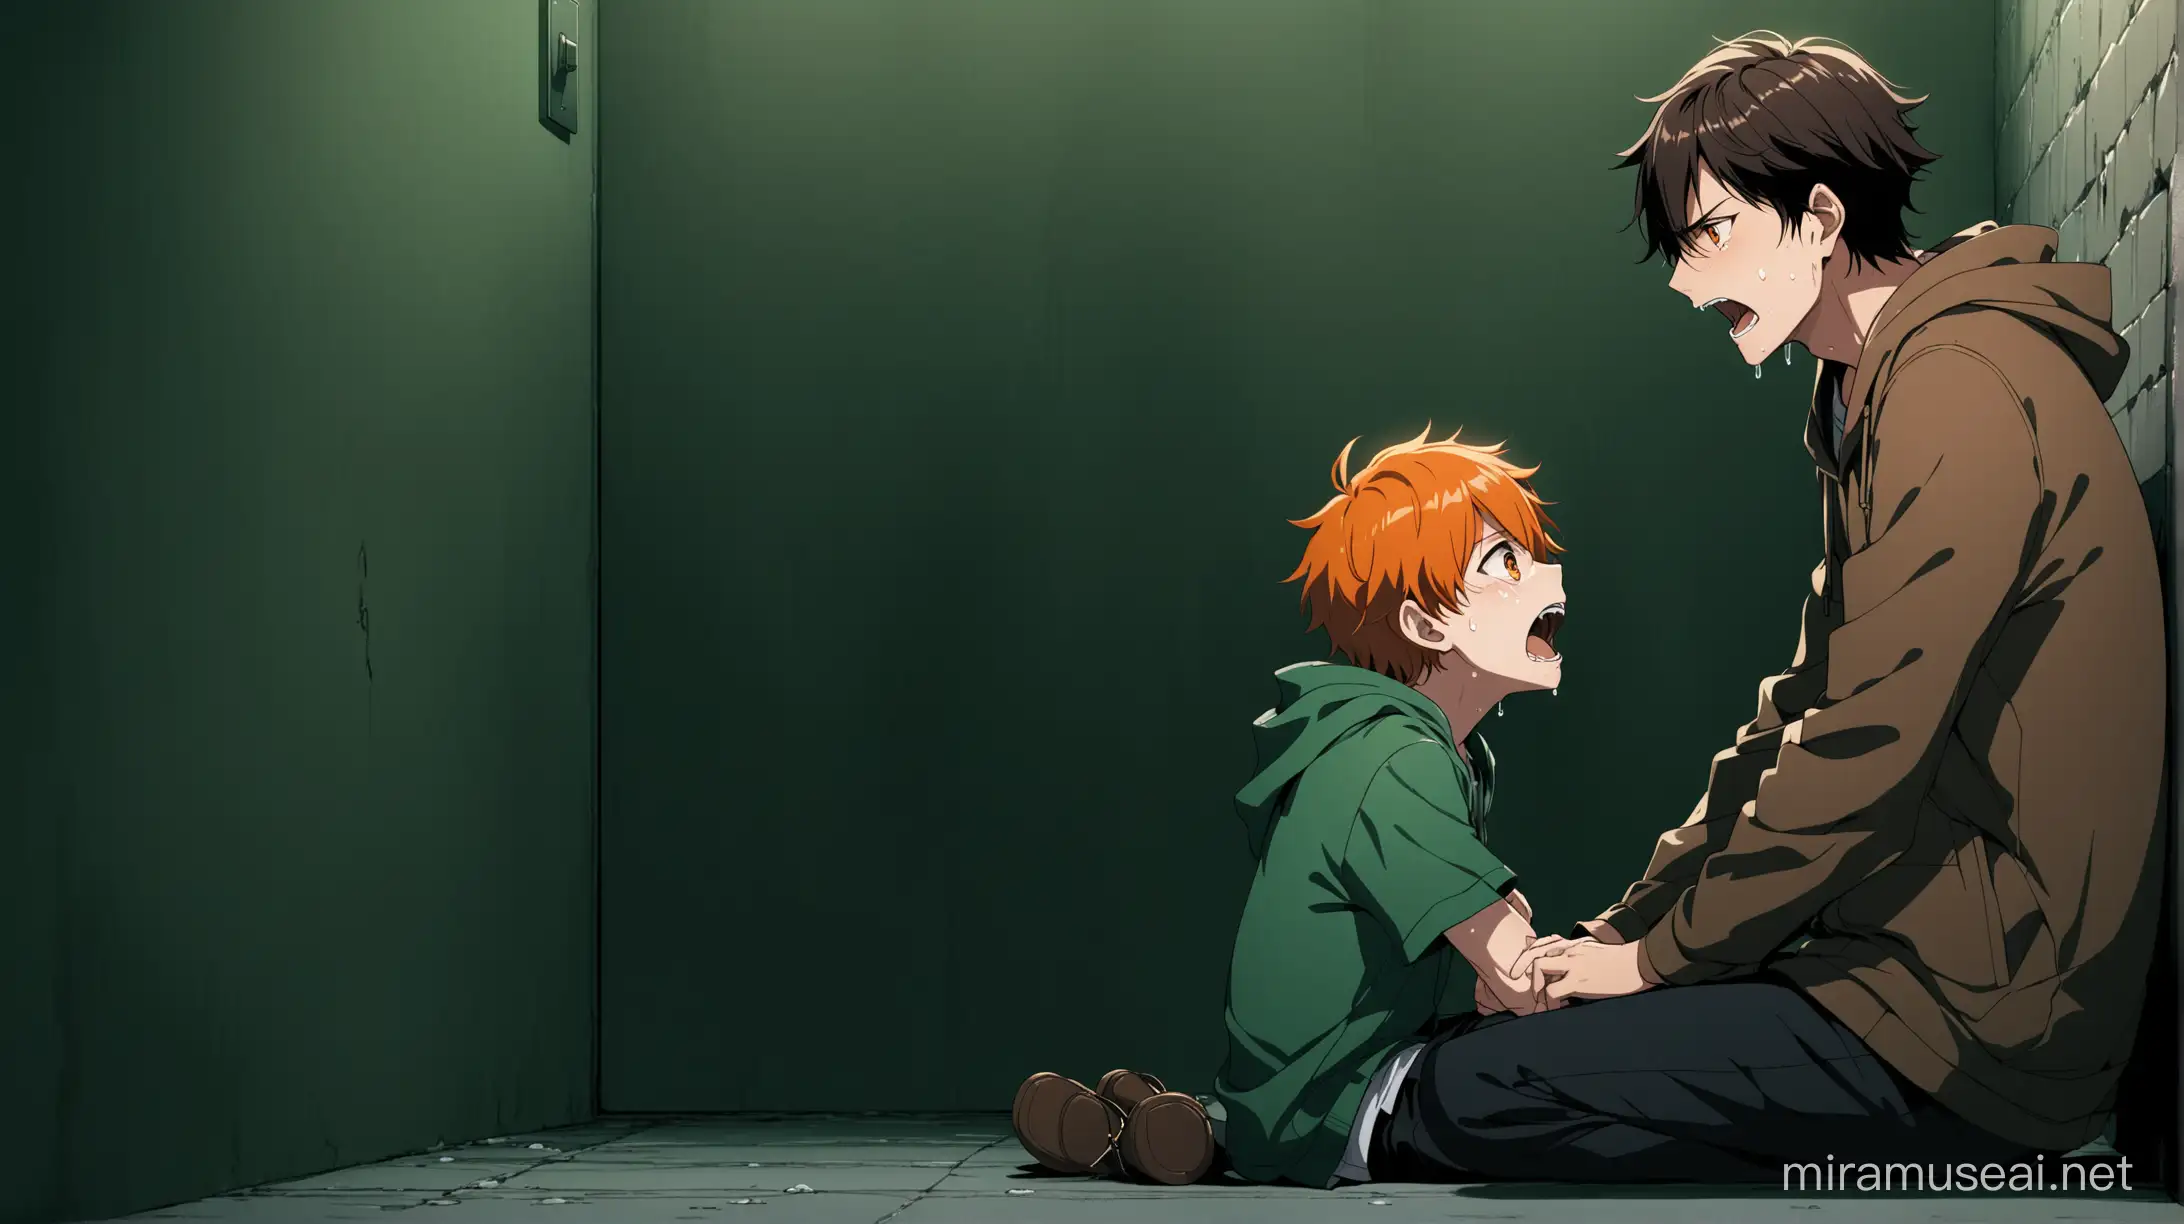 Emotional Anime Scene Teenage Boy Screaming at Unconscious Father in Secret Underground Room